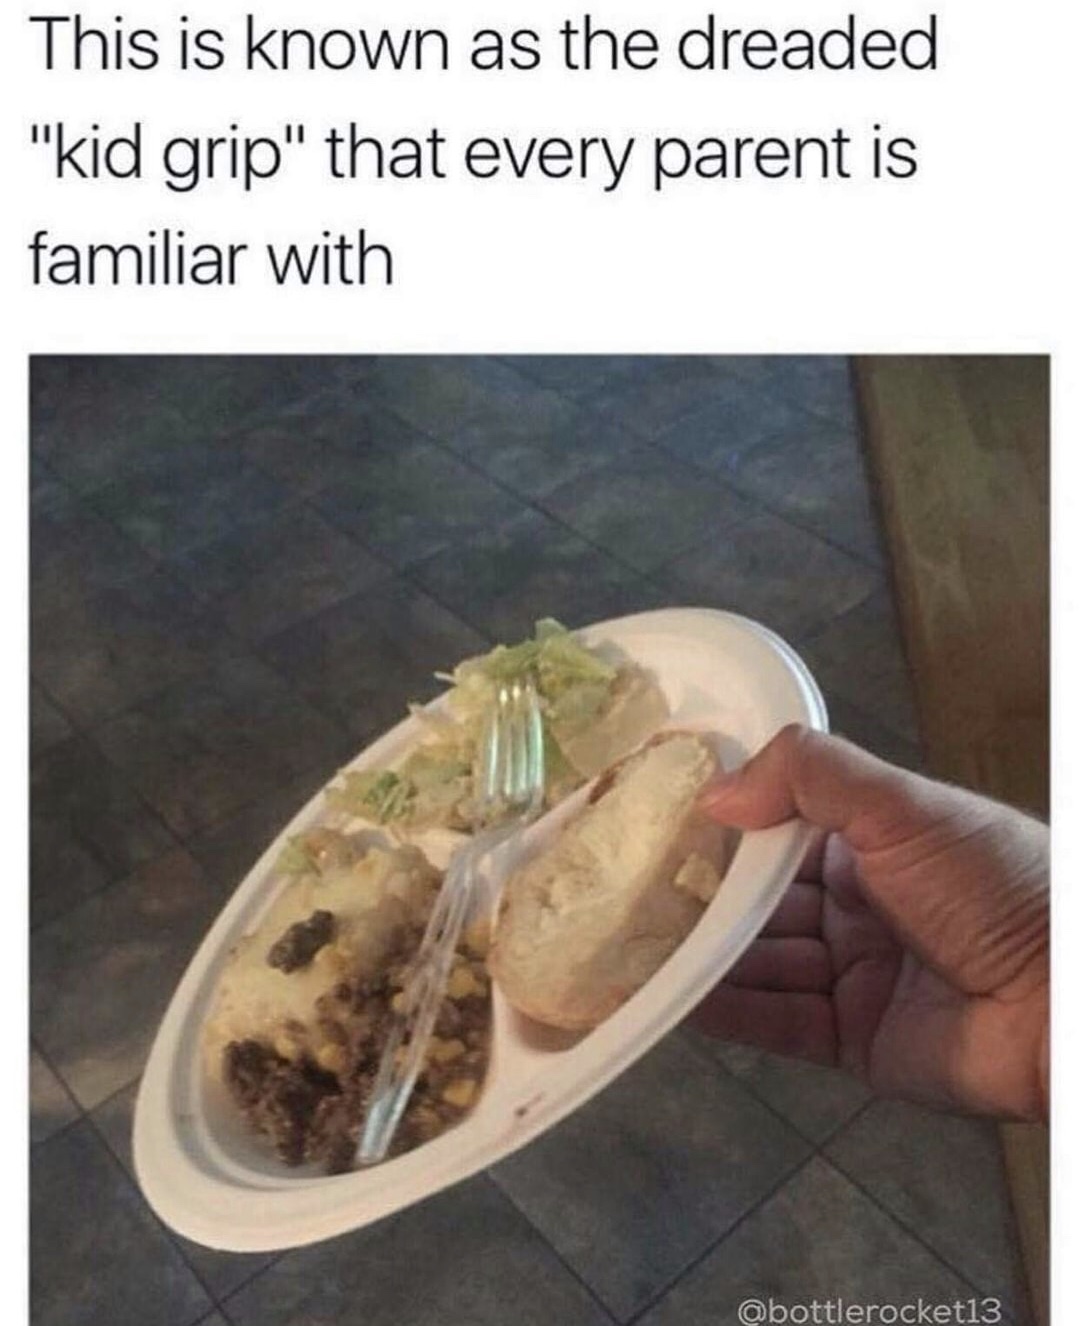 dreaded kid grip - This is known as the dreaded "kid grip" that every parent is familiar with